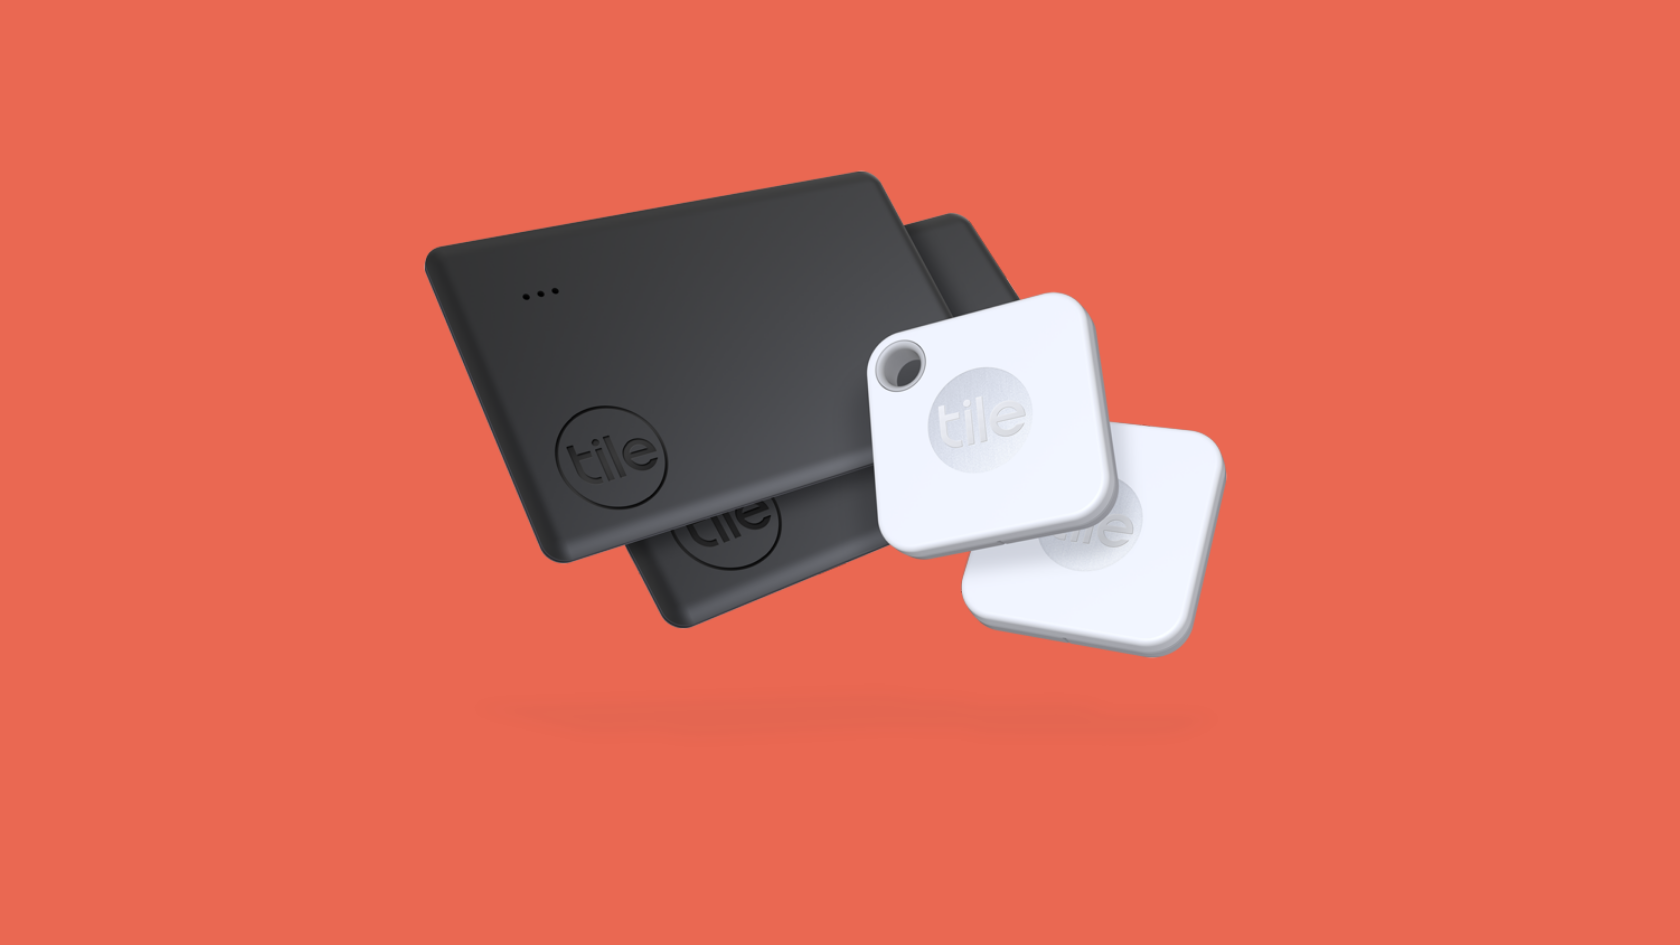 Last minute gift guides? Consider Tile Bluetooth trackers - techbuzzireland